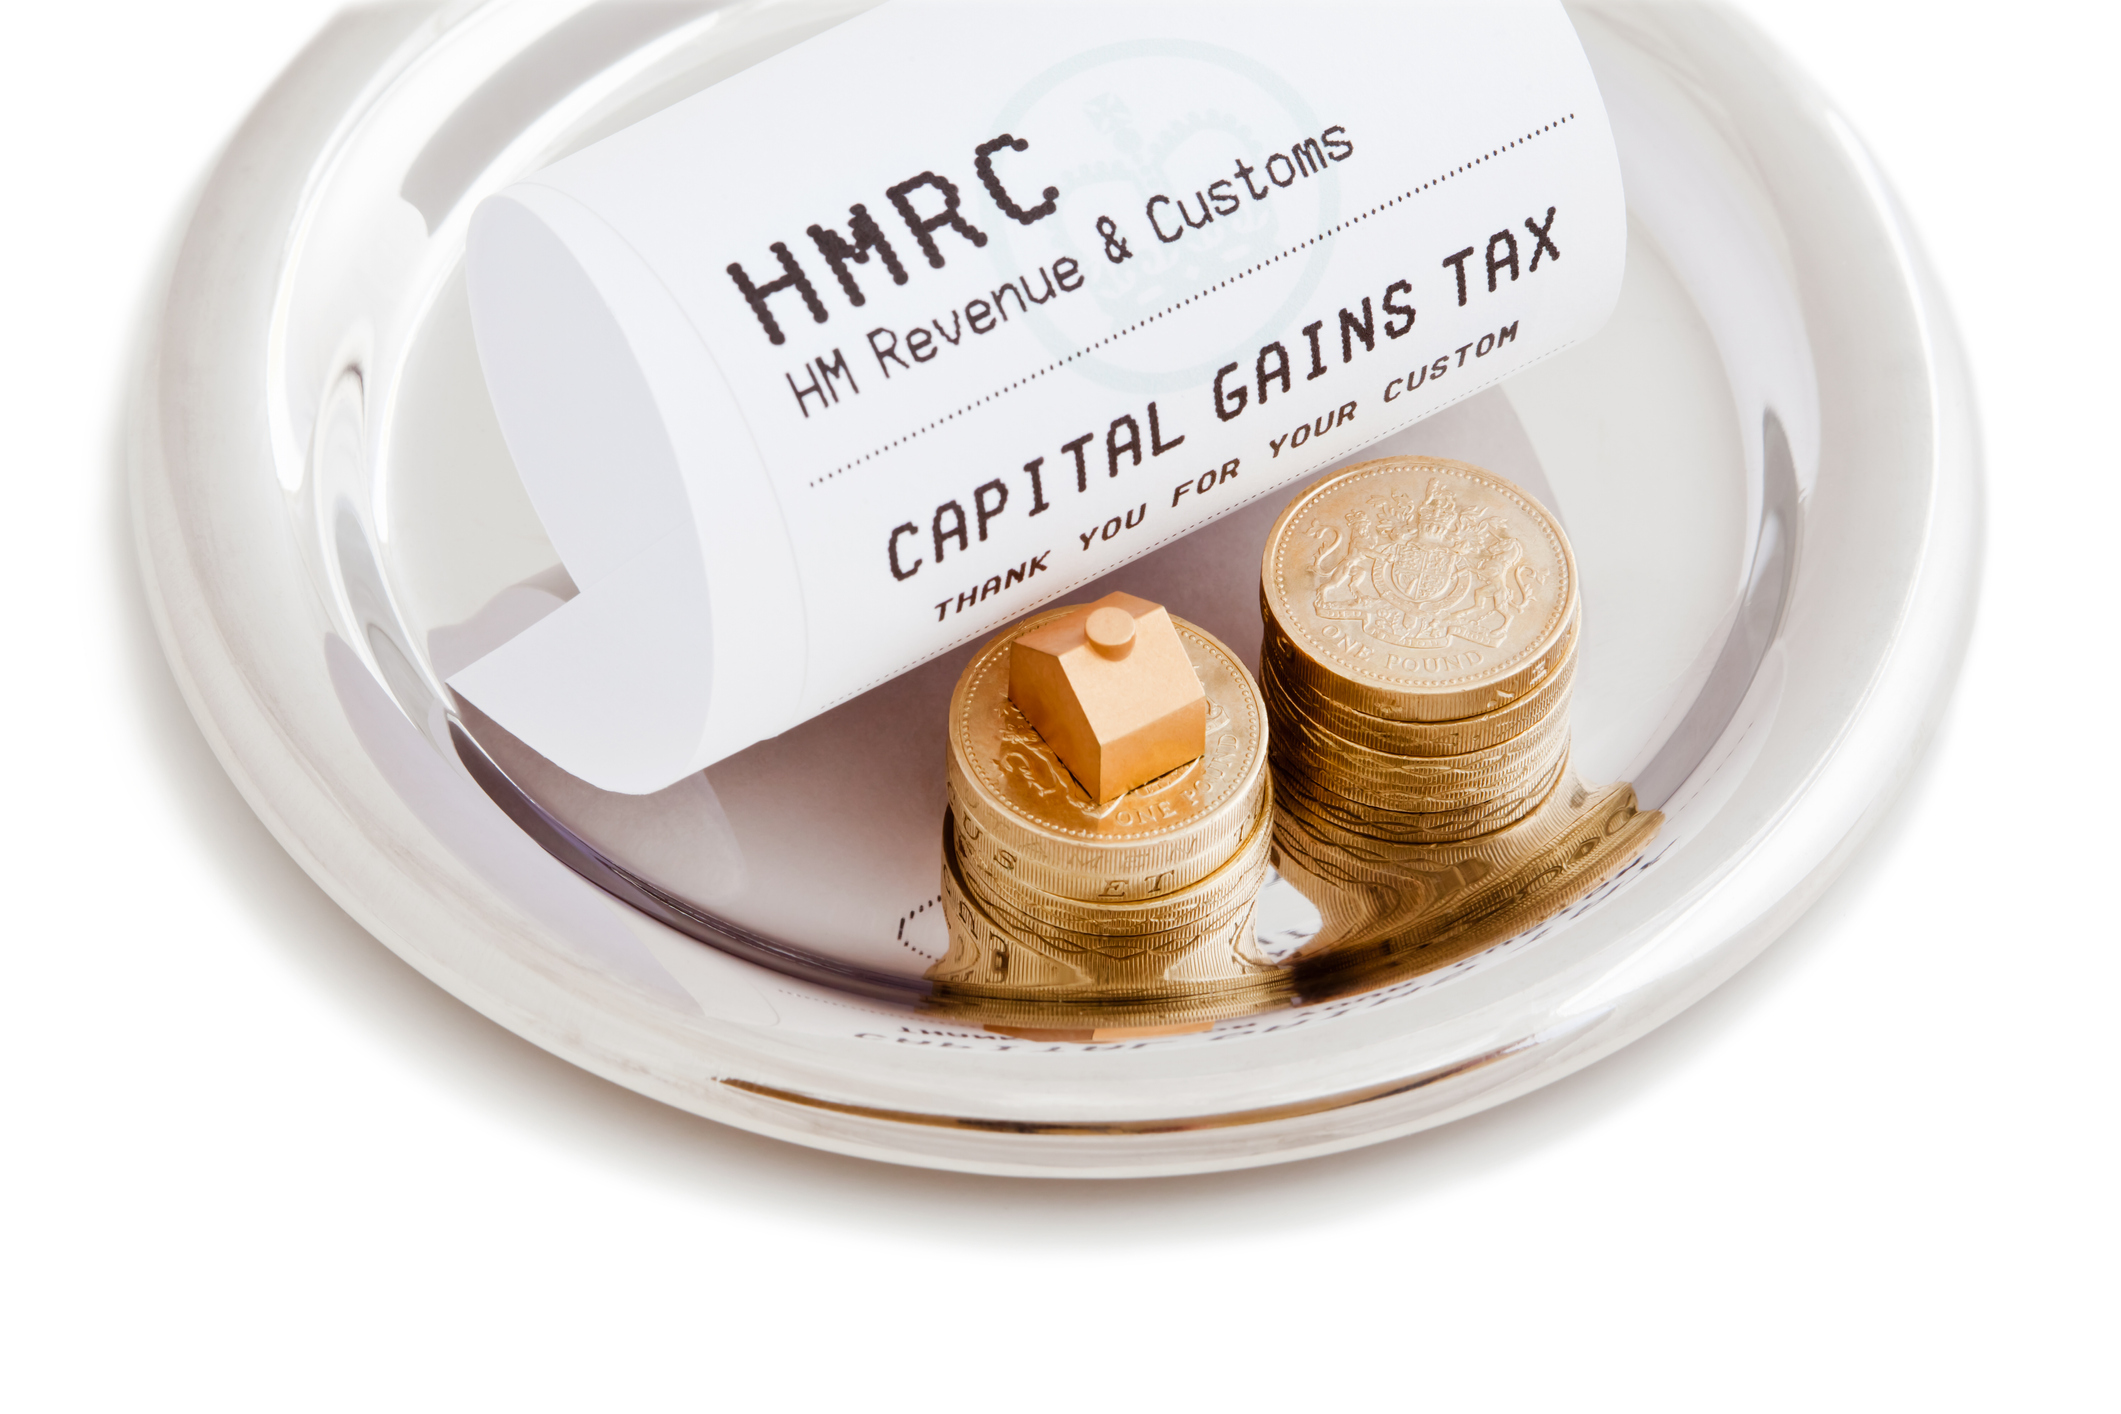 Capital gains tax receipts underline tempting target for Chancellor